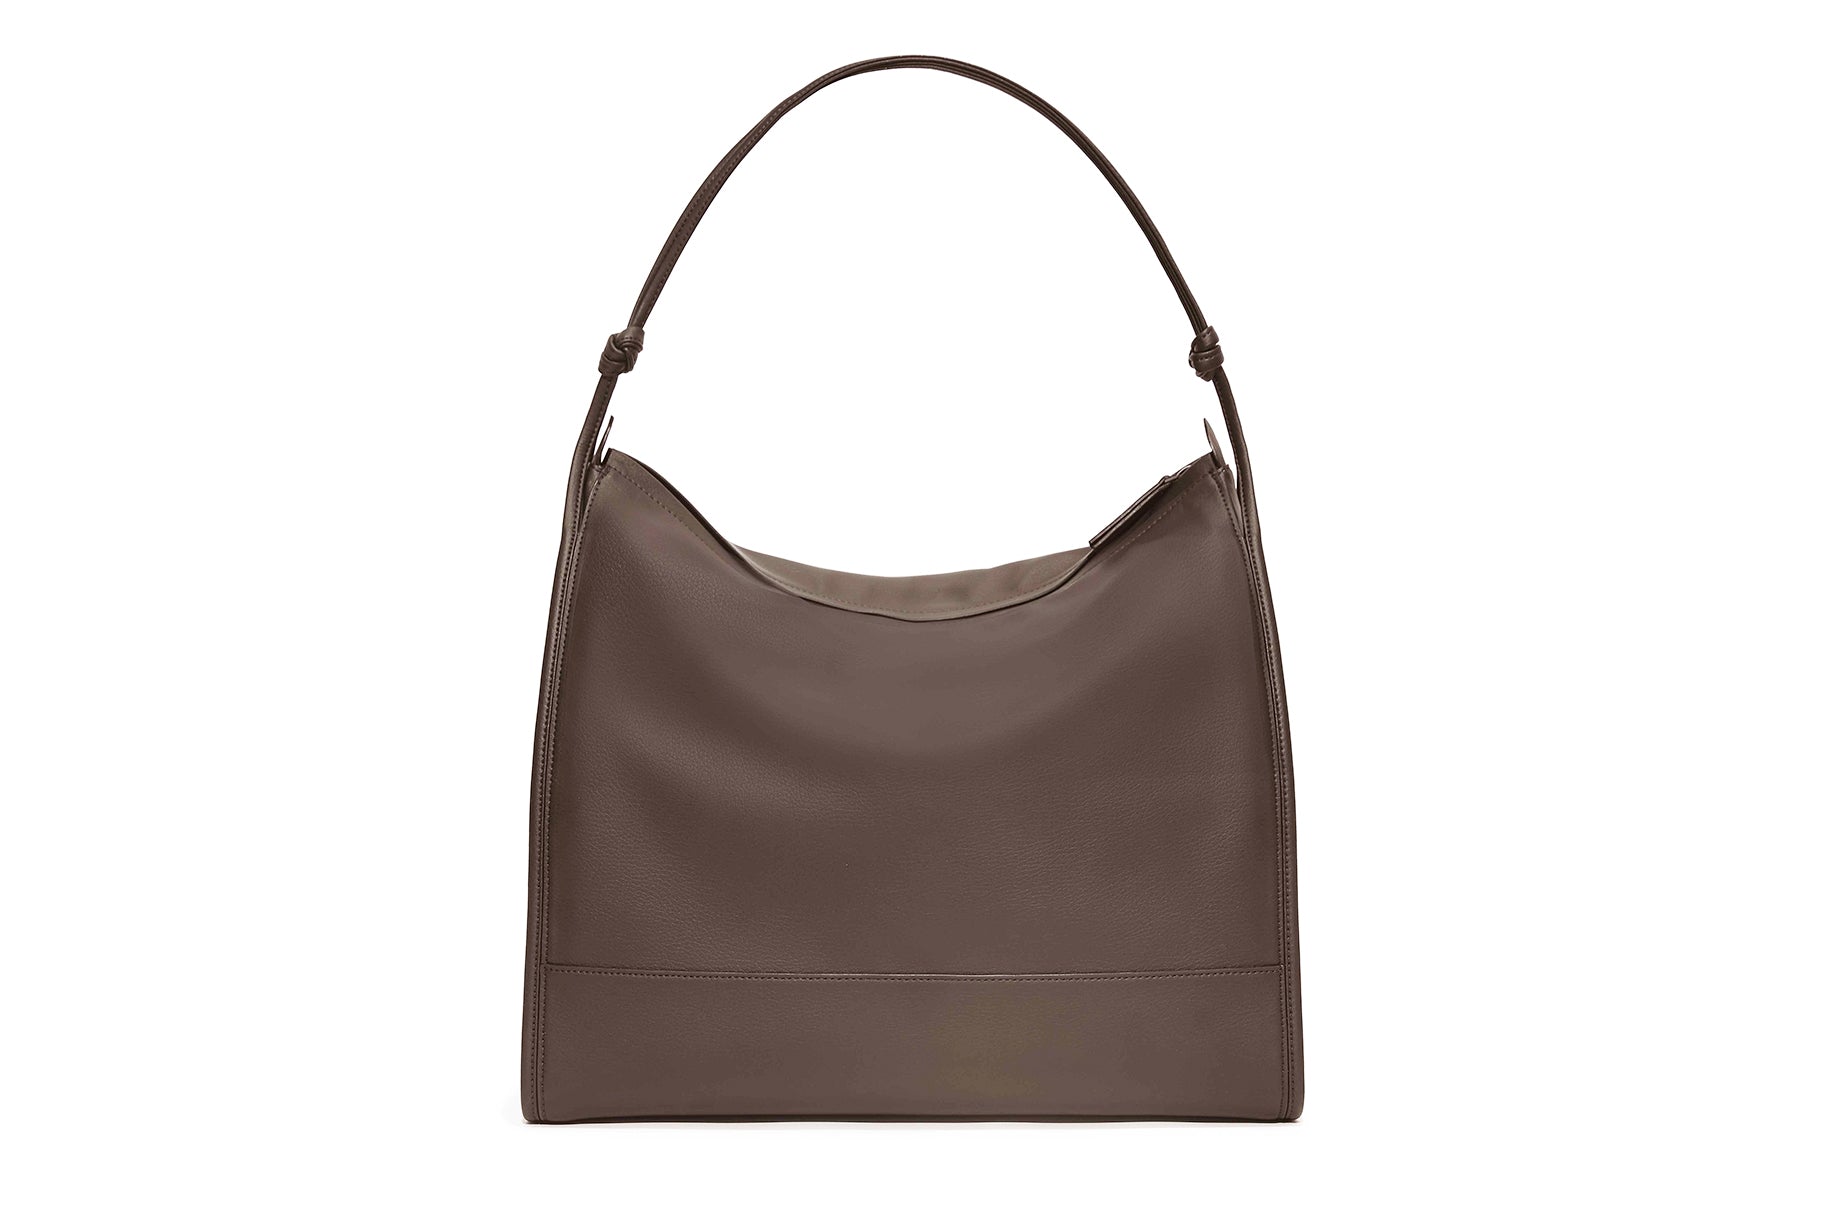 The Shoulder Bag in Banbū in Taupe image 4